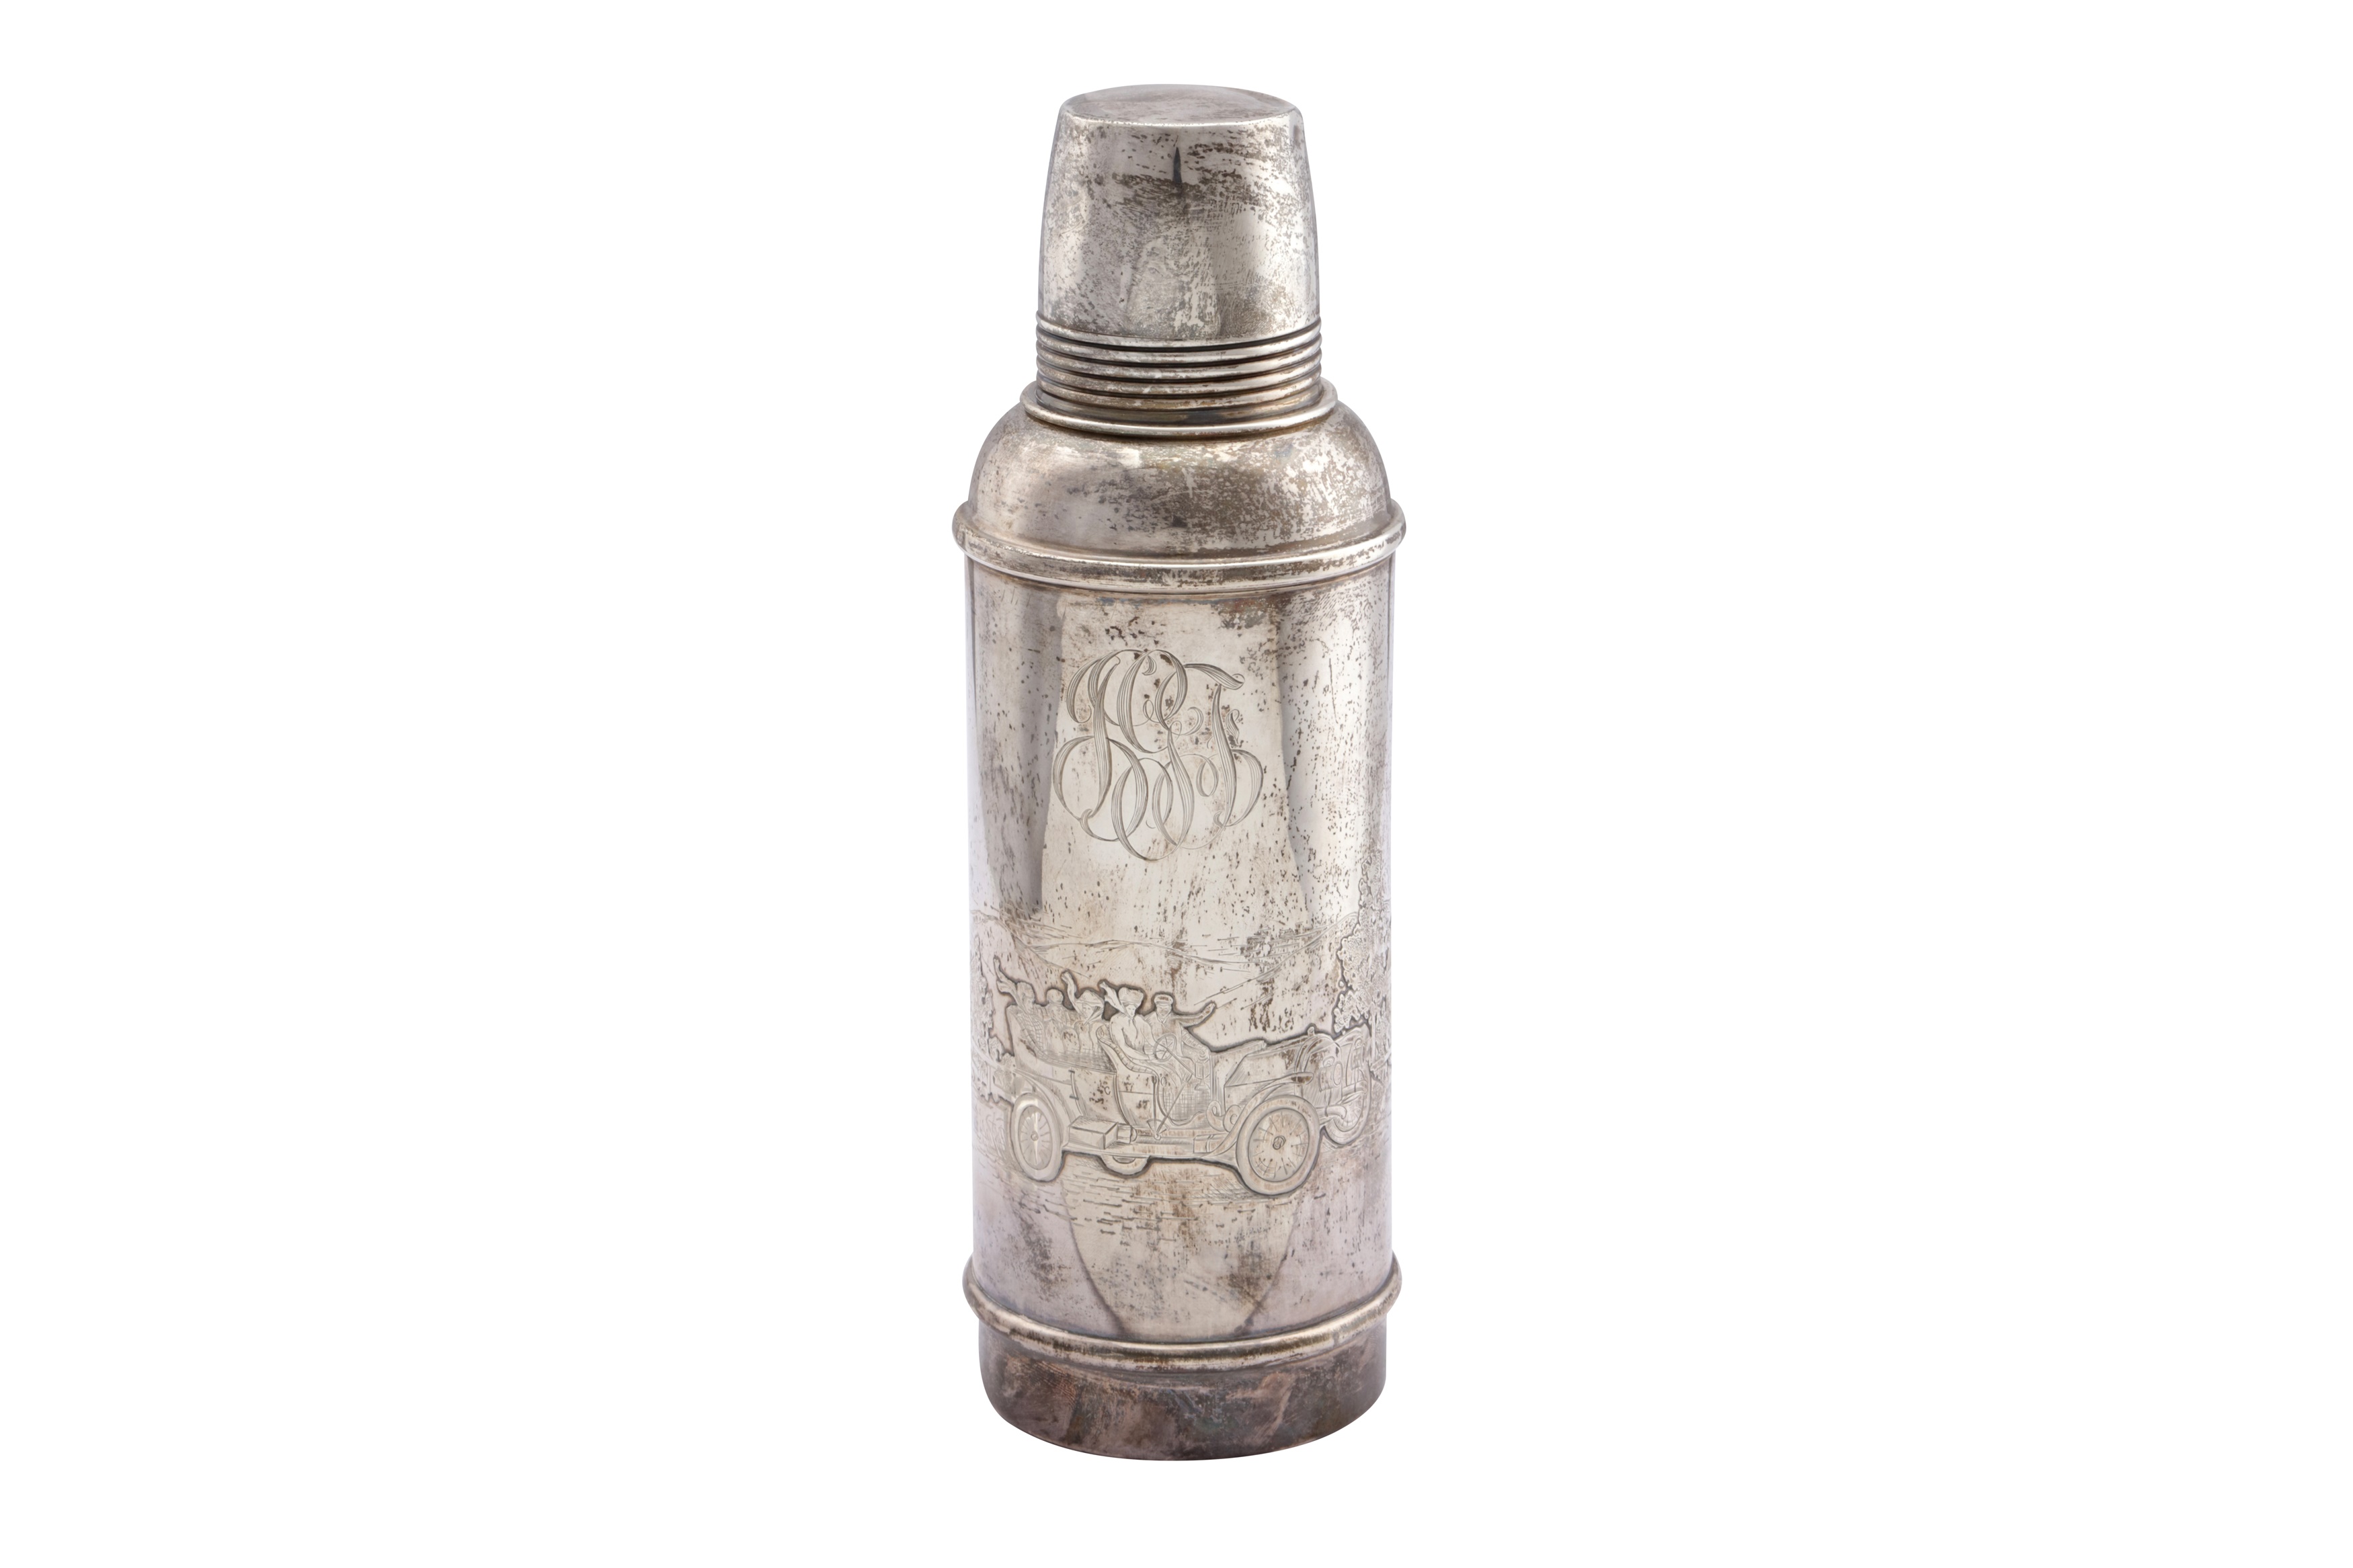 AN EARLY 20TH CENTURY AMERICAN STERLING SILVER AND GLASS LINED COCKTAIL SHAKER, NEW YORK CIRCA 1910 